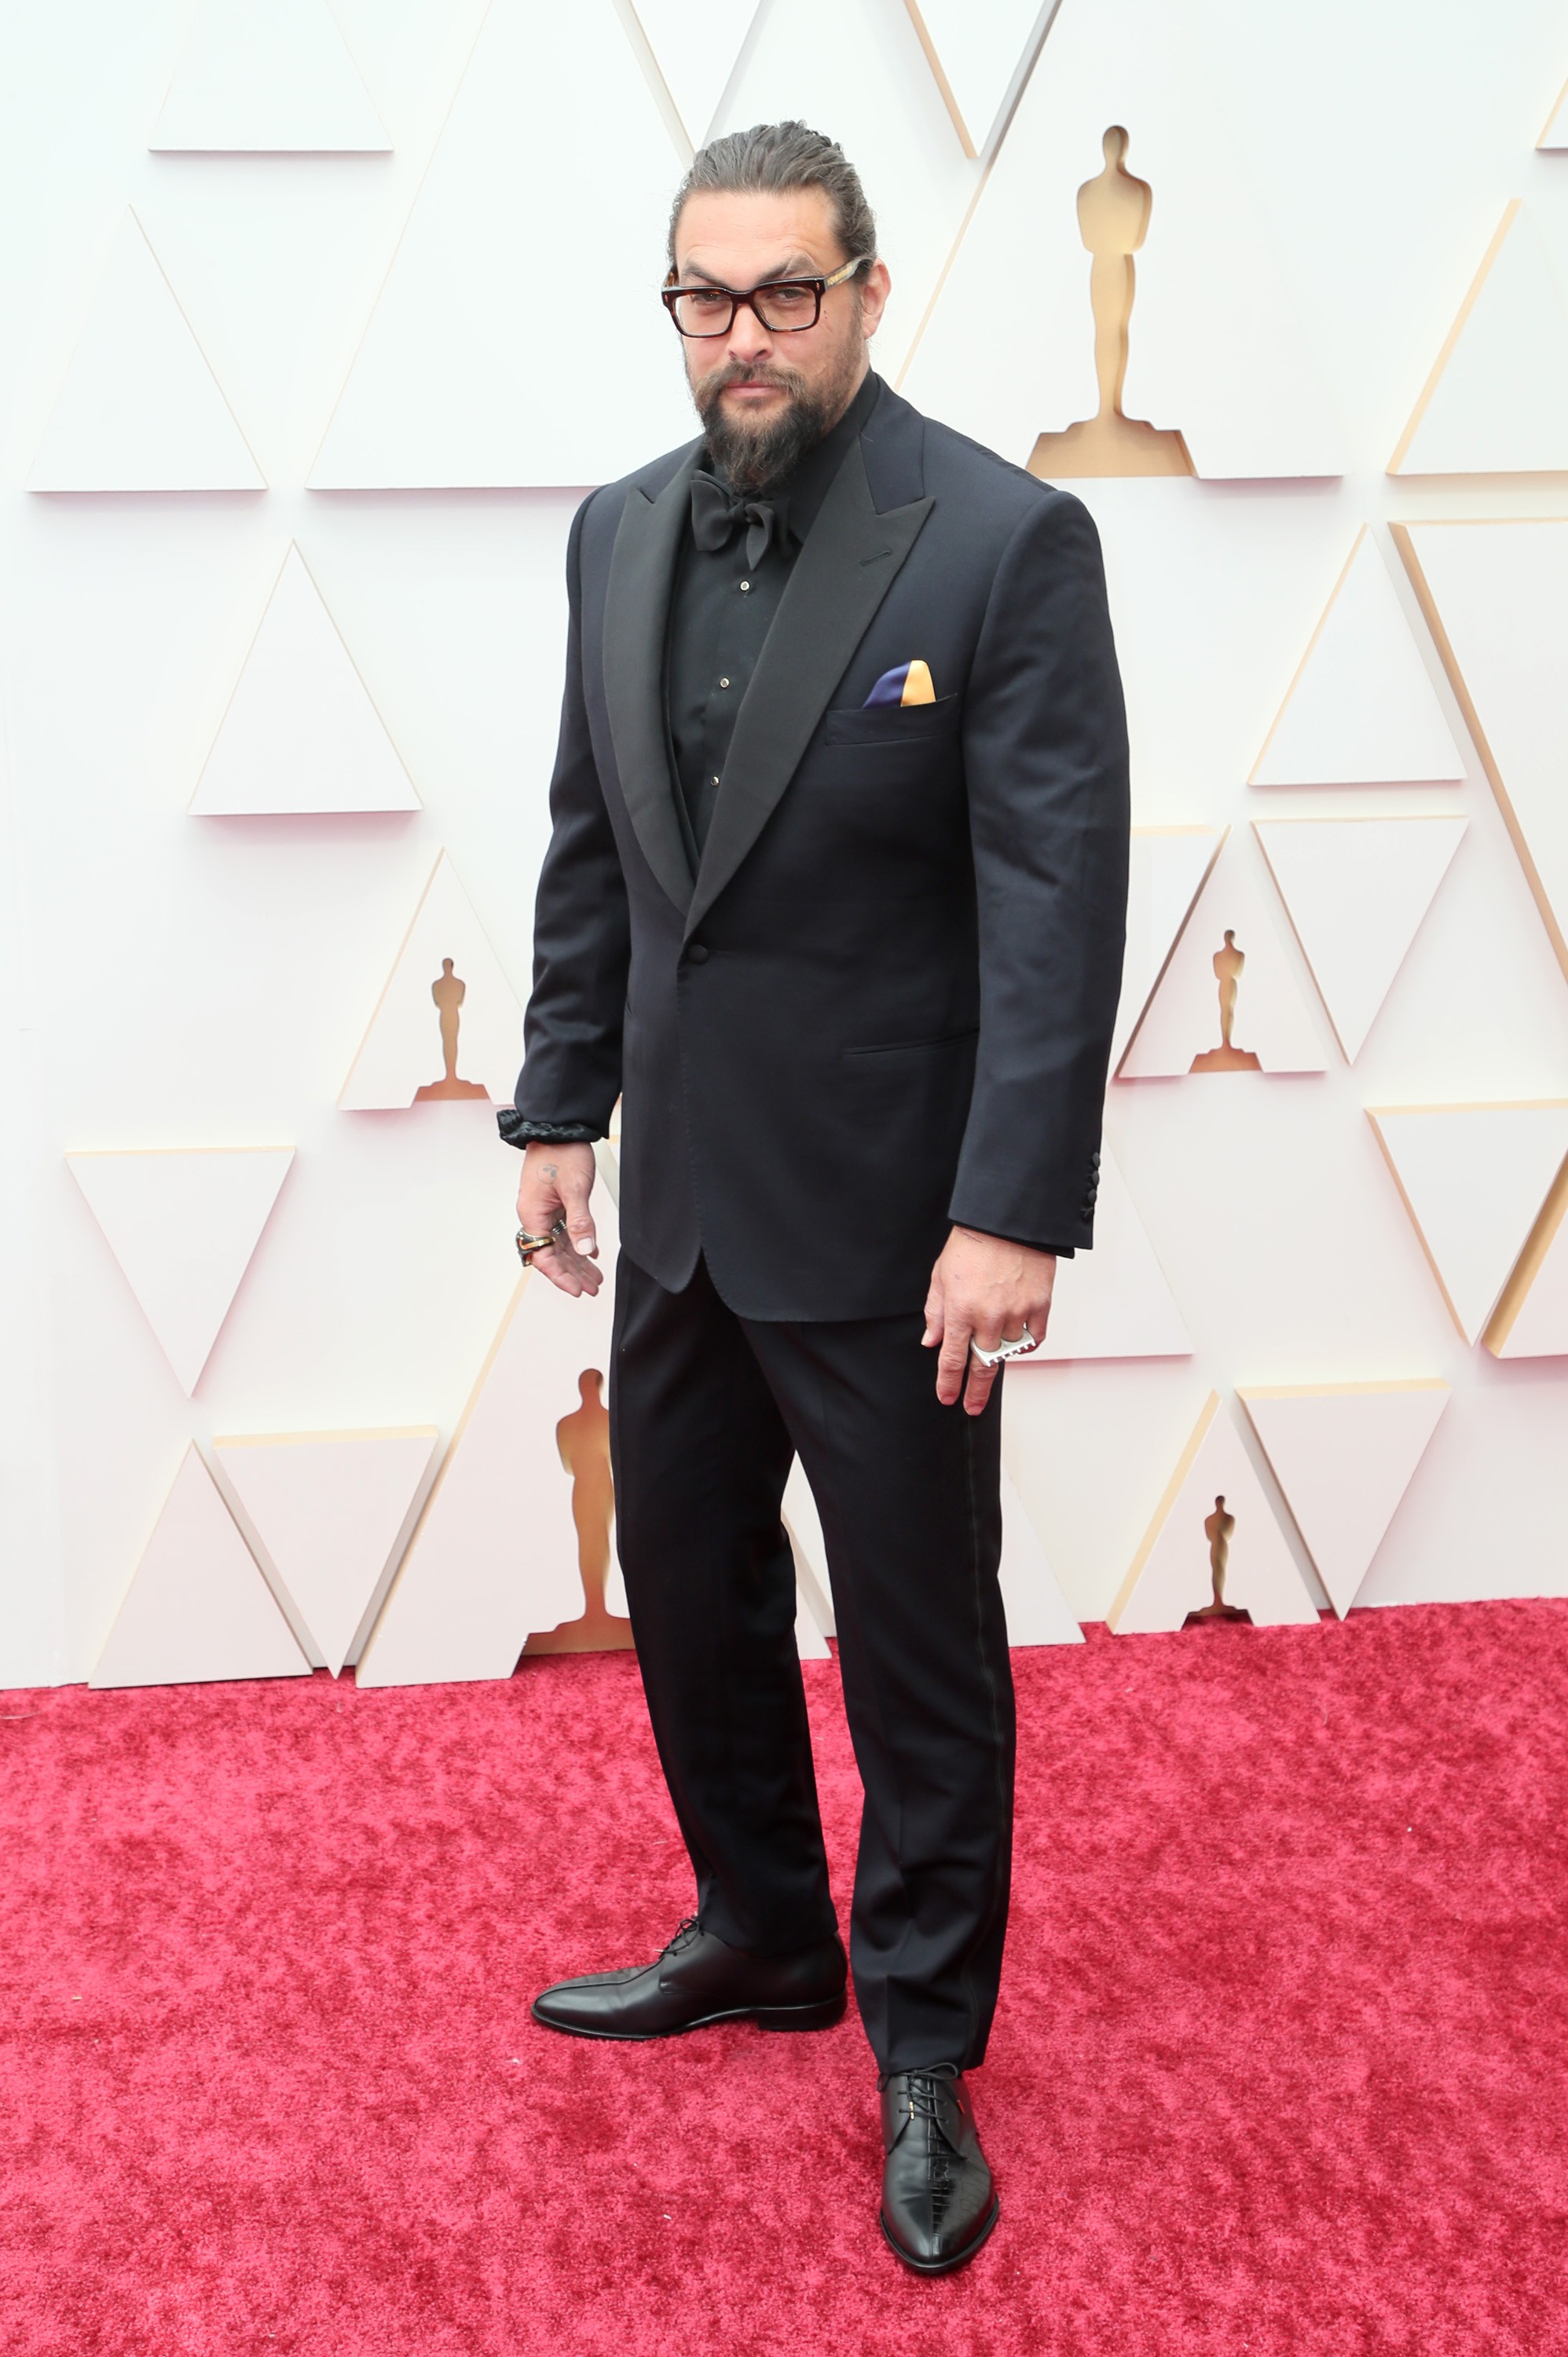 HOLLYWOOD, CALIFORNIA - MARCH 27: Jason Momoa attends the 94th Annual Academy Awards at Hollywood and Highland on March 27, 2022 in Hollywood, California. (Photo by David Livingston/Getty Images) (Foto: Getty Images)